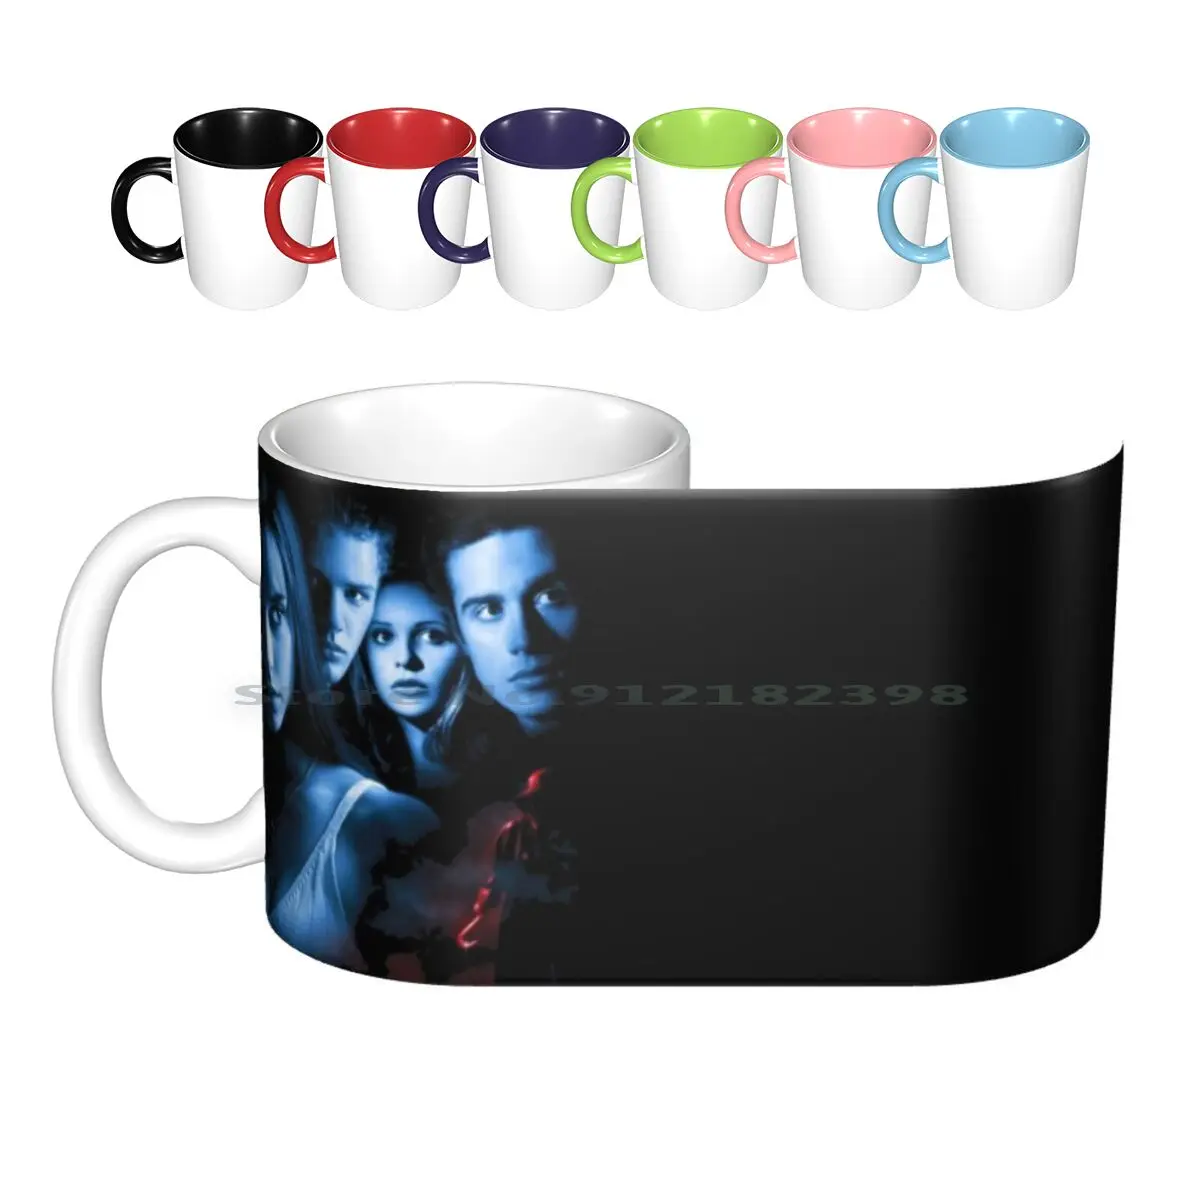 

I Know What You Did Last Summer Ceramic Mugs Coffee Cups Milk Tea Mug Know What You Did Last Summer Fisherman Hook Horror Scary